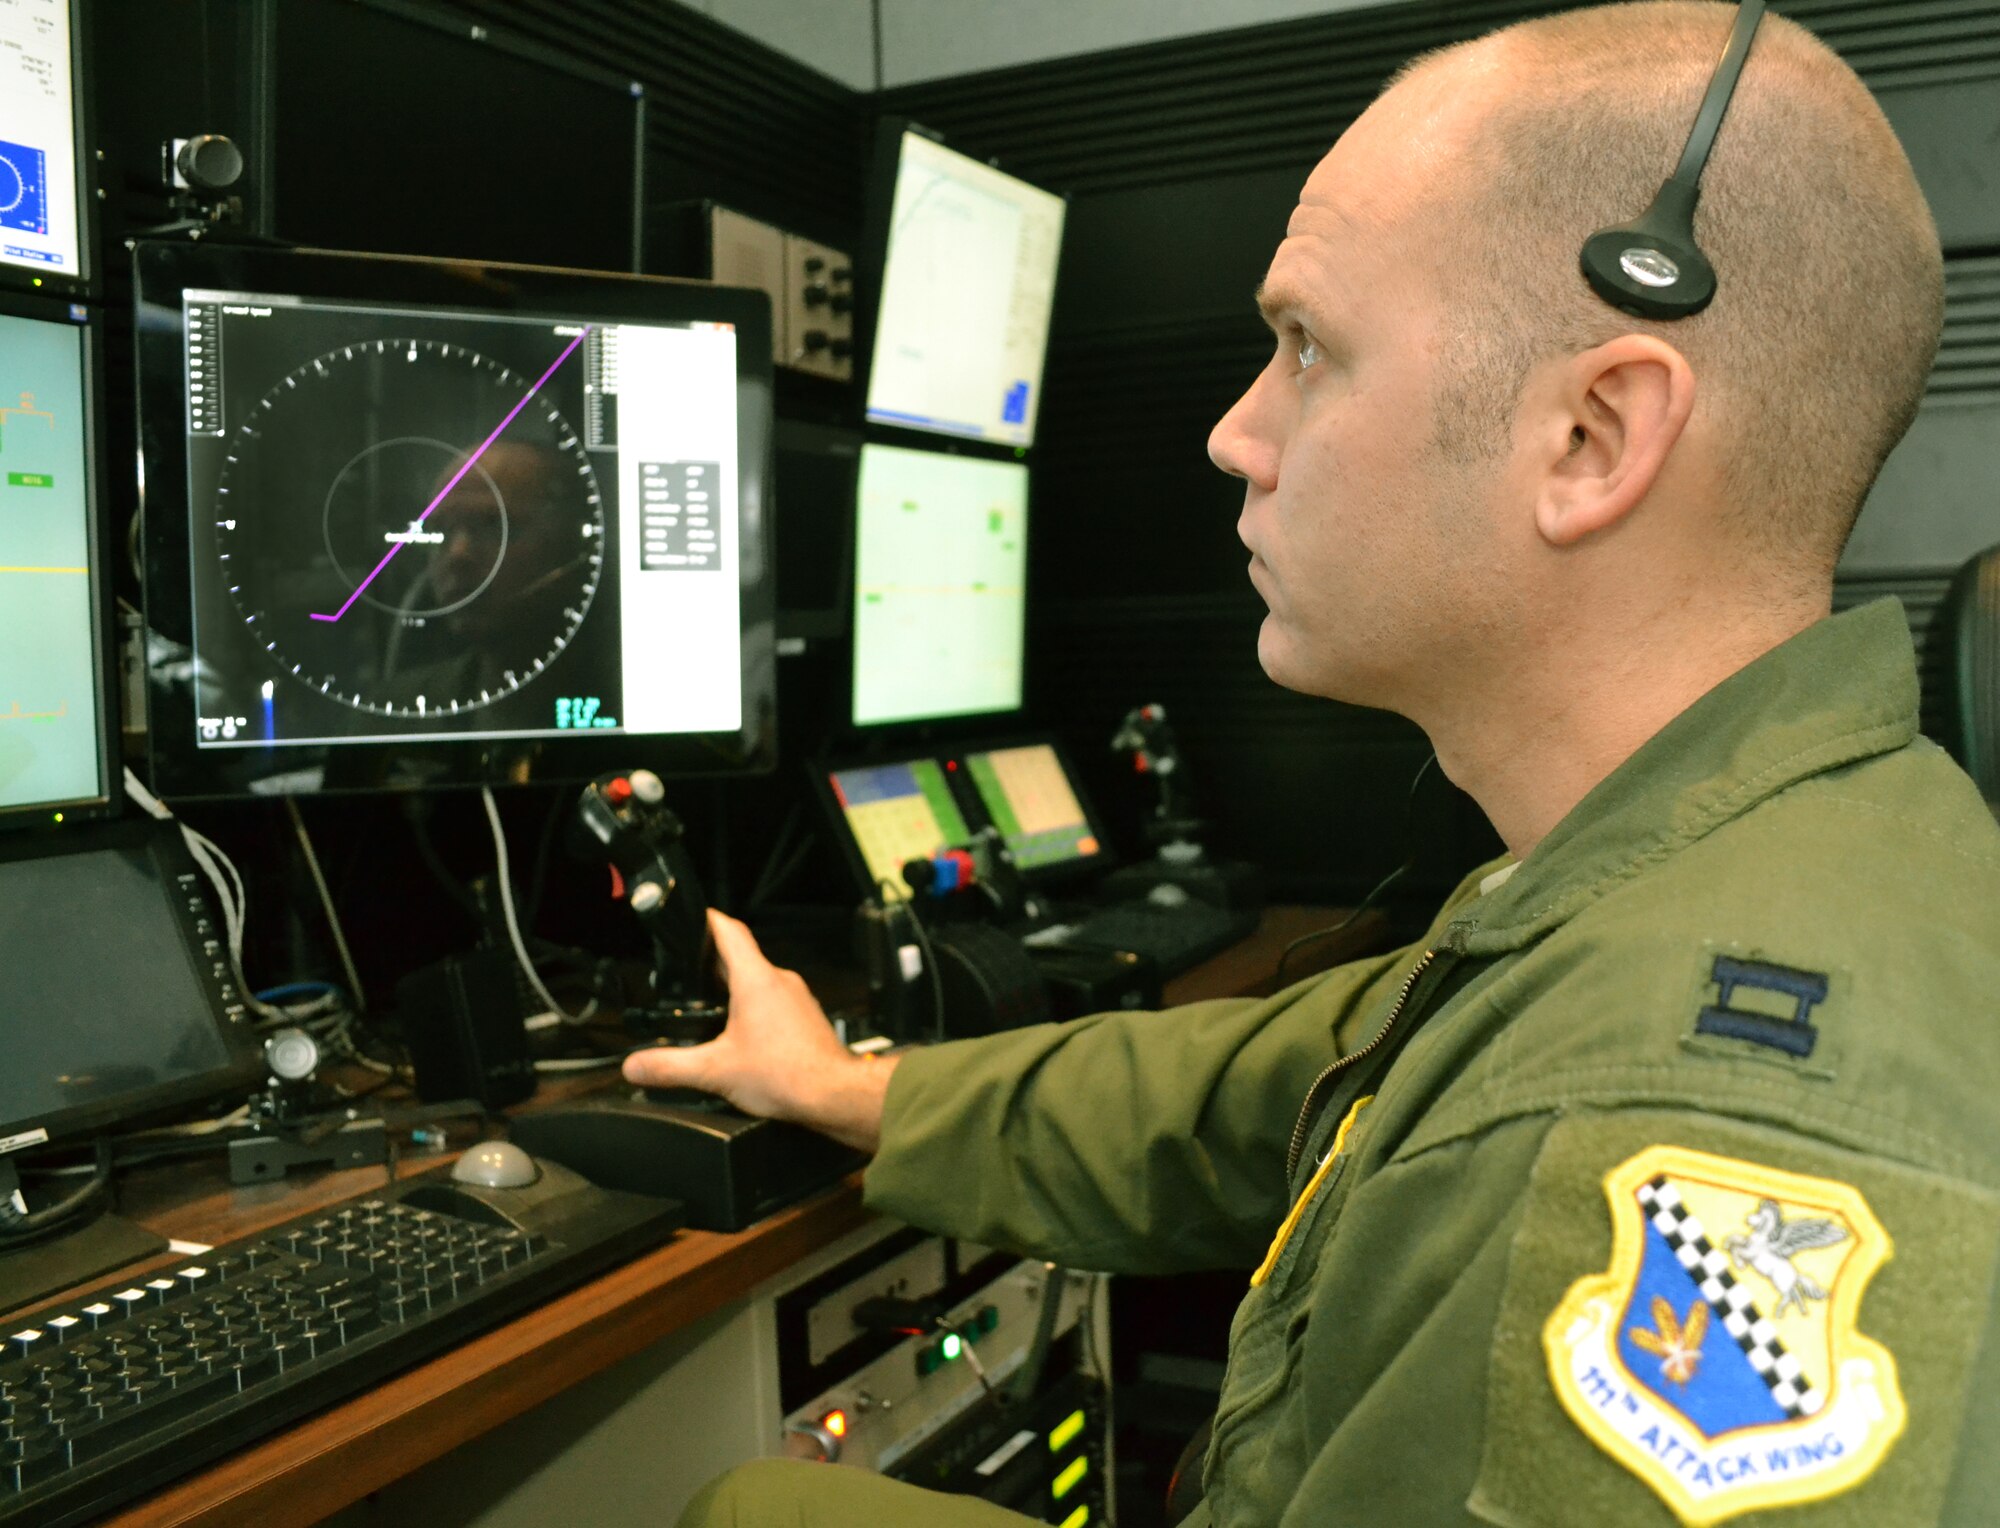 Capt. Christopher, a 103rd Attack Squadron pilot at Horsham Air Guard Station, Pa.,  operates an MQ-9 Reaper flight simulator at the FAA William J. Hughes Technical Center, Atlantic City, N.J., March 3, 2016. The Federal Aviation Administration selected eight 111th Attack Wing pilot volunteers from Horsham AGS for a study aimed at developing a Detect and Avoid display for unmanned aircraft systems. (U.S. Air National Guard photo by Tech. Sgt. Andria Allmond)